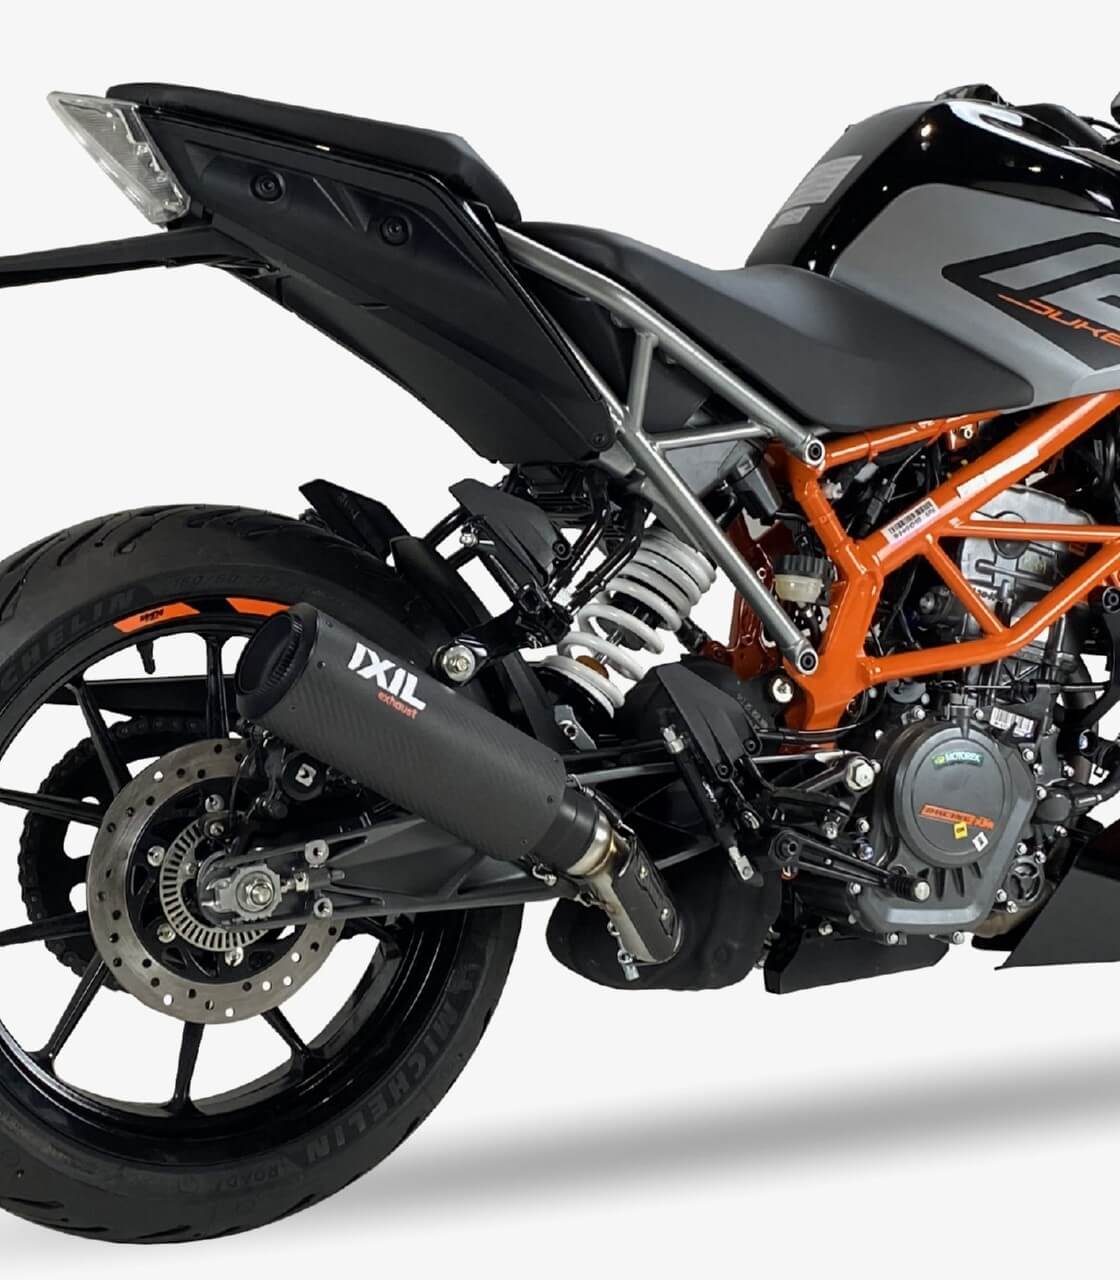 KTM Duke 125 2017on Review  Speed Specs  Prices  MCN